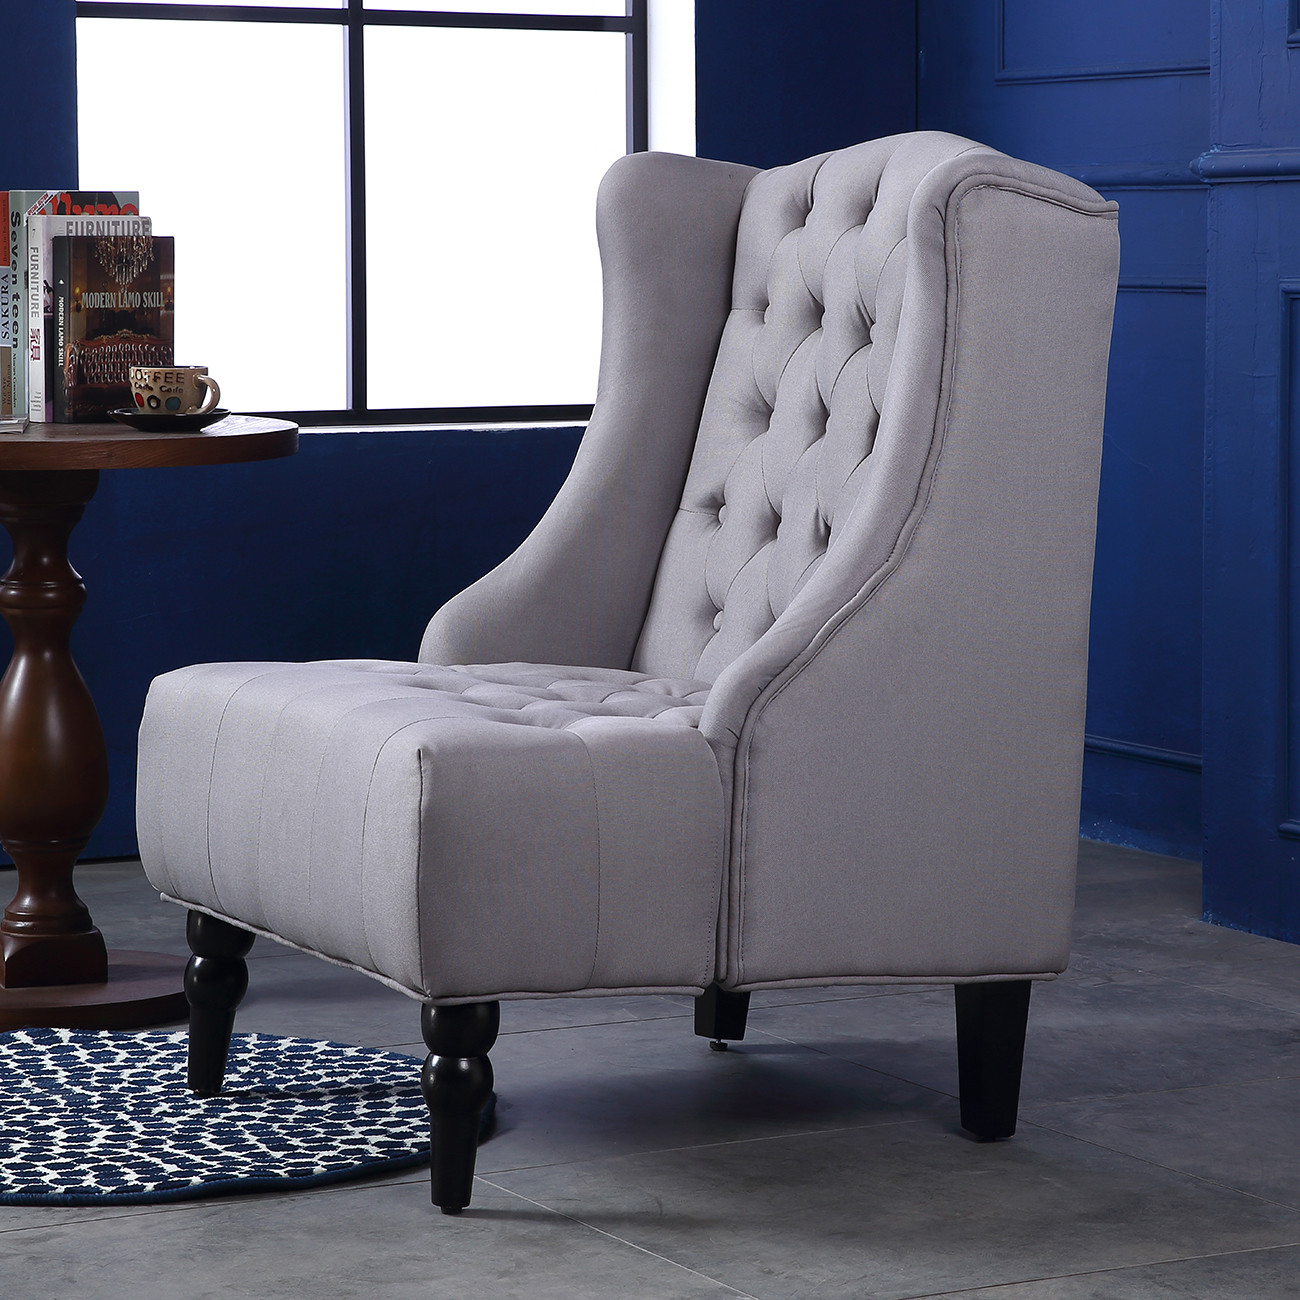 Accent Living Room Chairs
 Wingback Accent Chair Tall High back Living Room Tufted